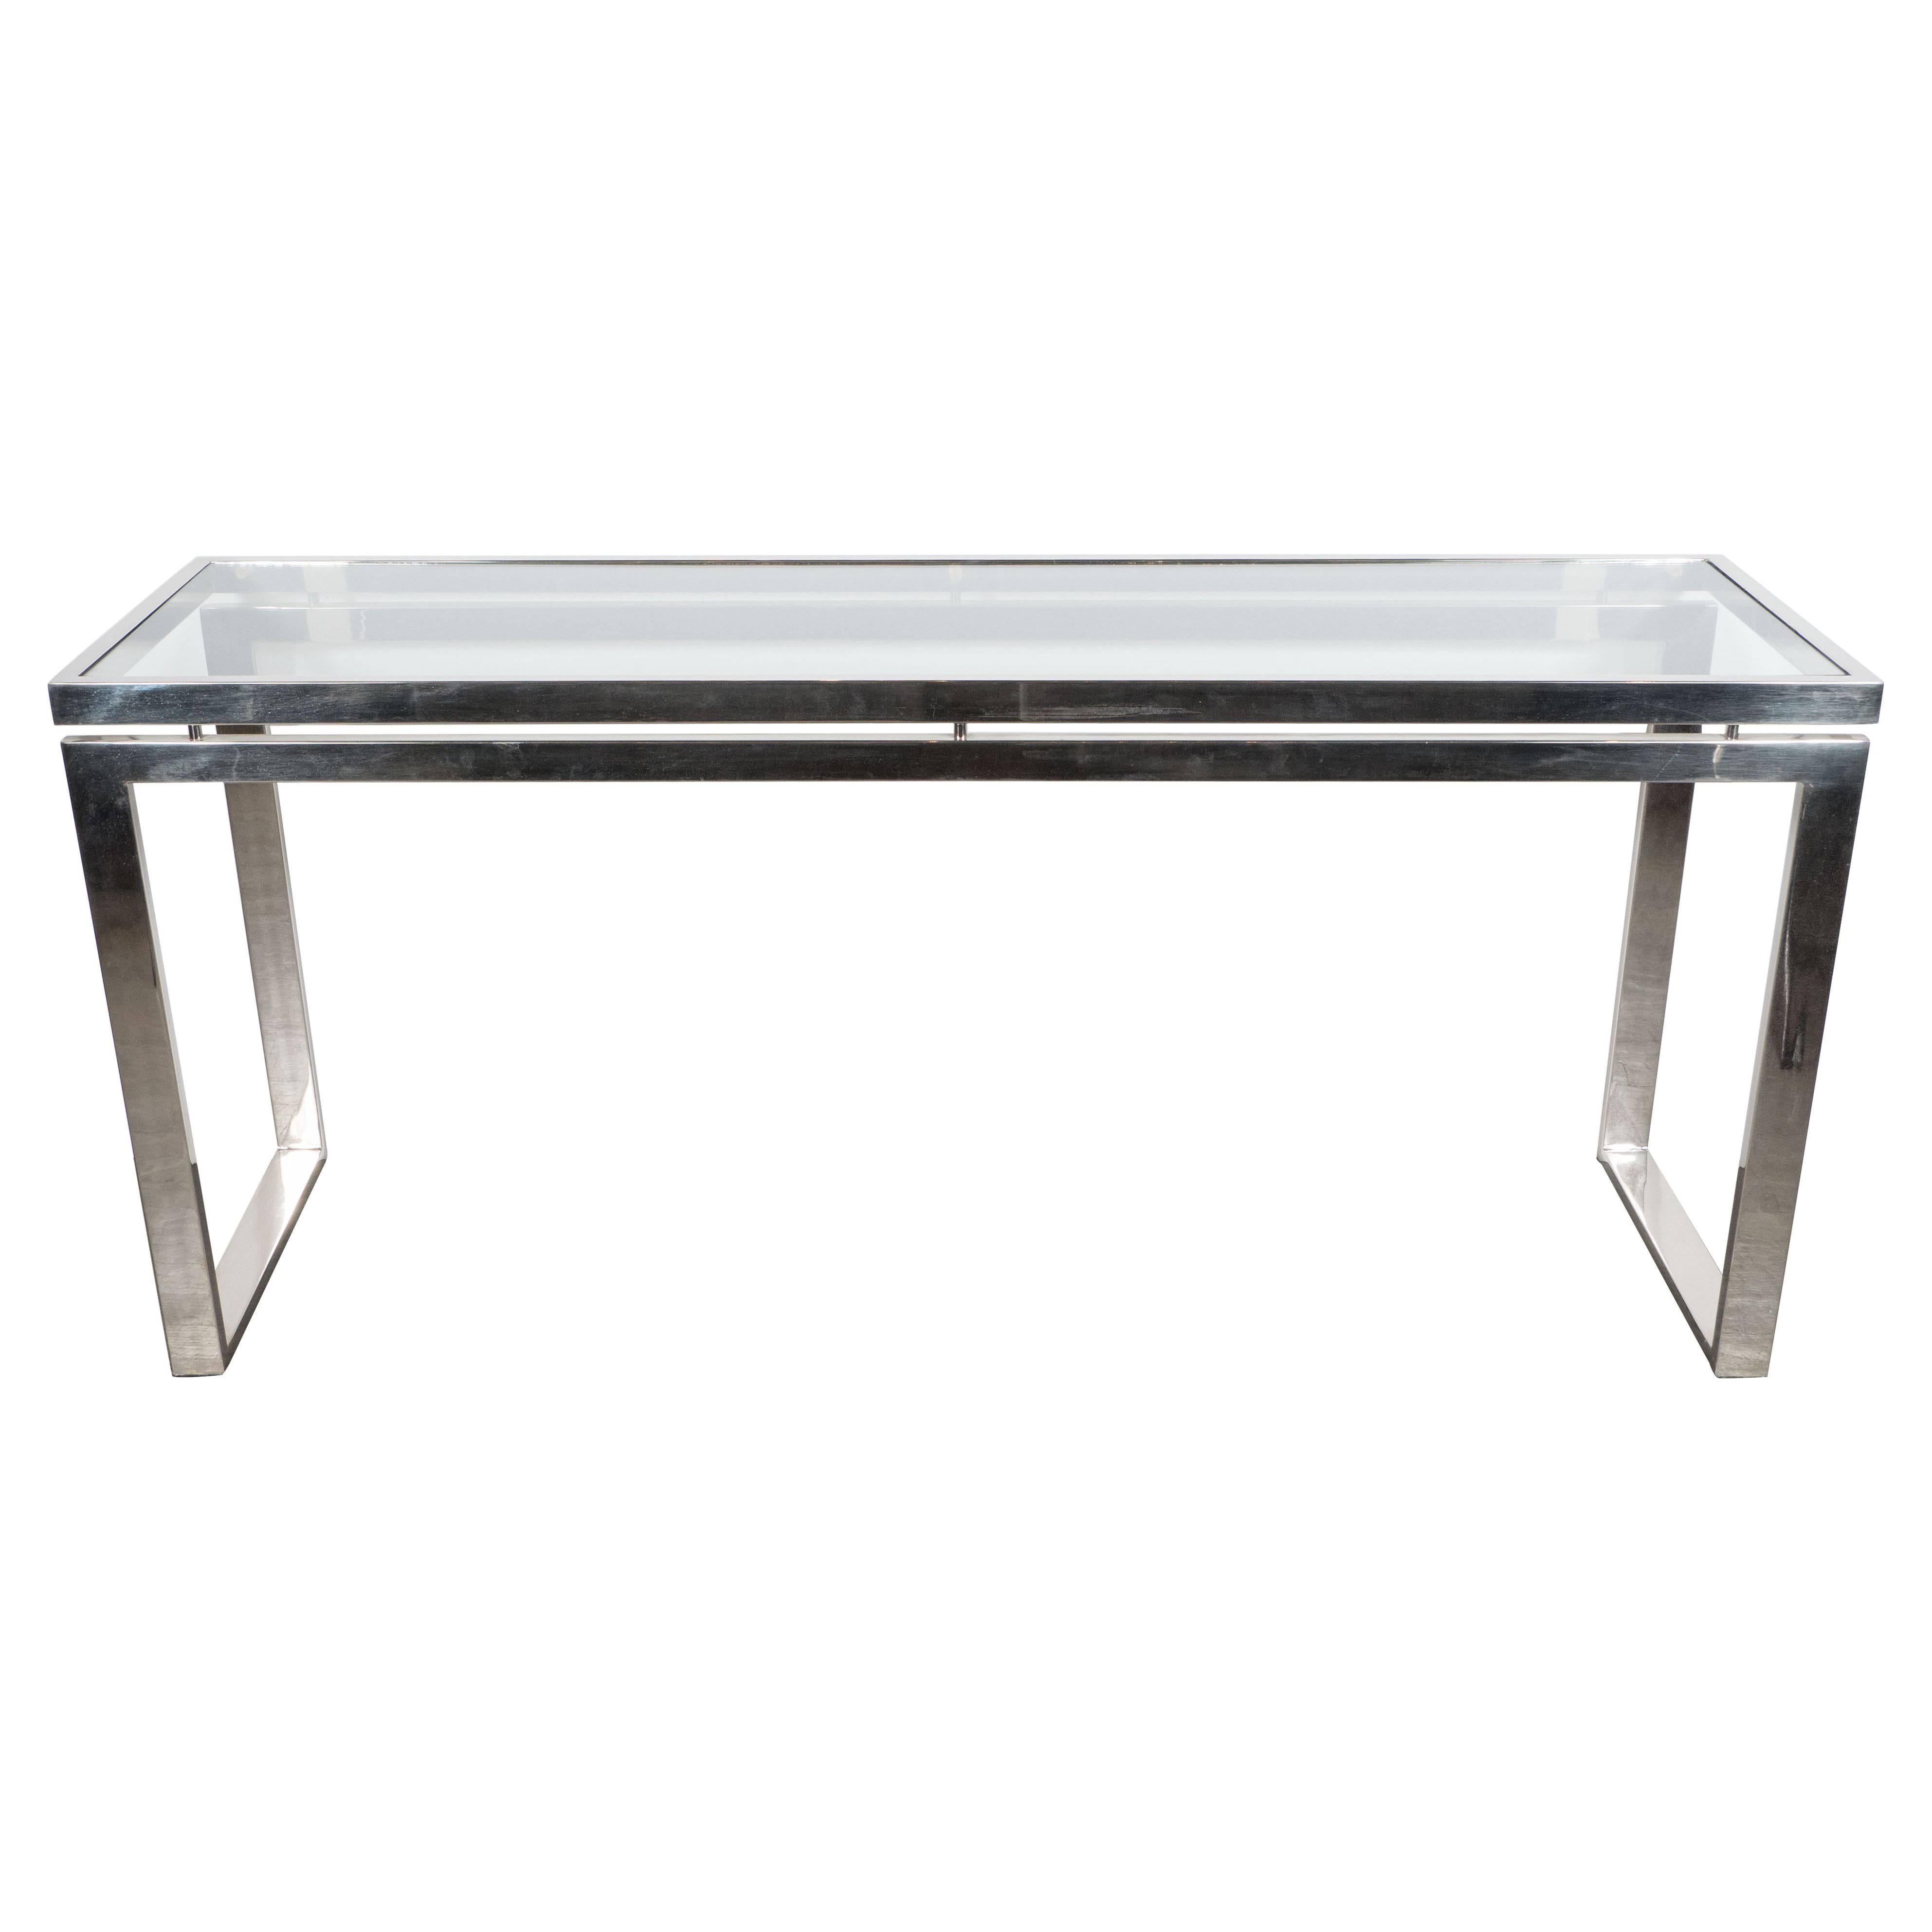 Mid-Century Modernist Chrome and Glass Console or Sofa Table by Milo Baughman